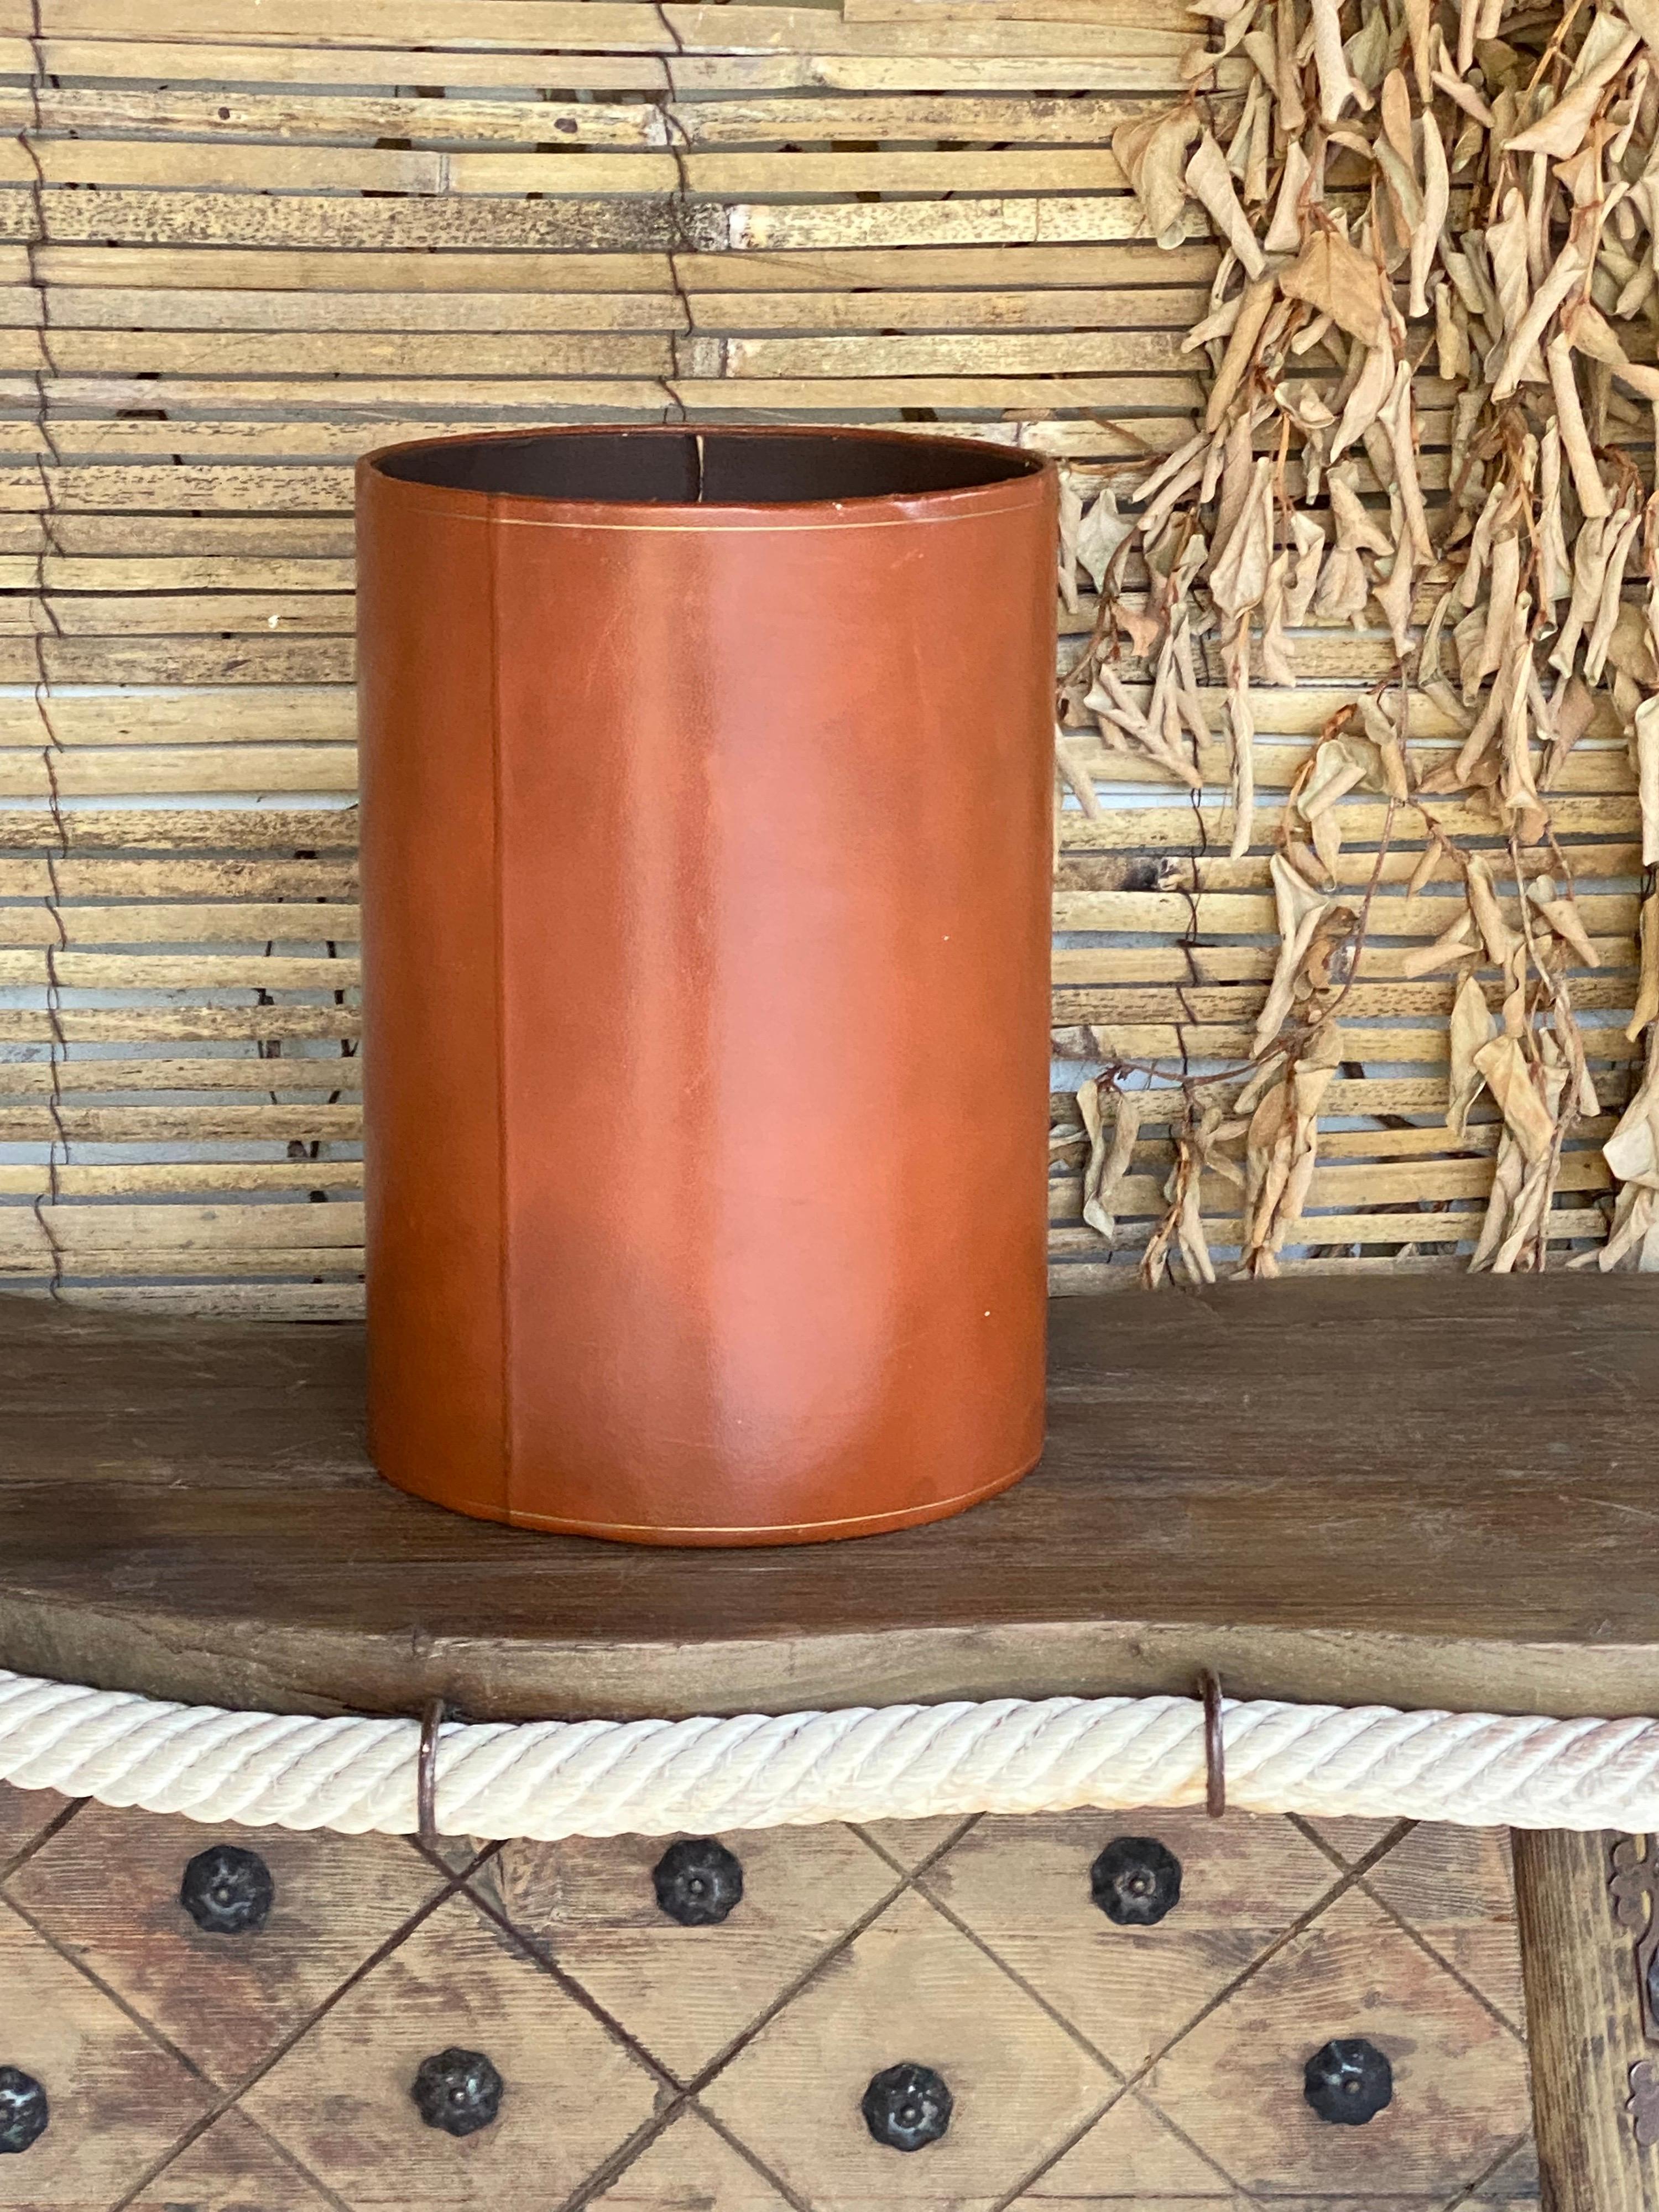 This basket, or trash can, is signed Lancel Paris underneath, and has been made in Italy in the 1970's.
The leather as a beautiful old patina.
It is in good condition.